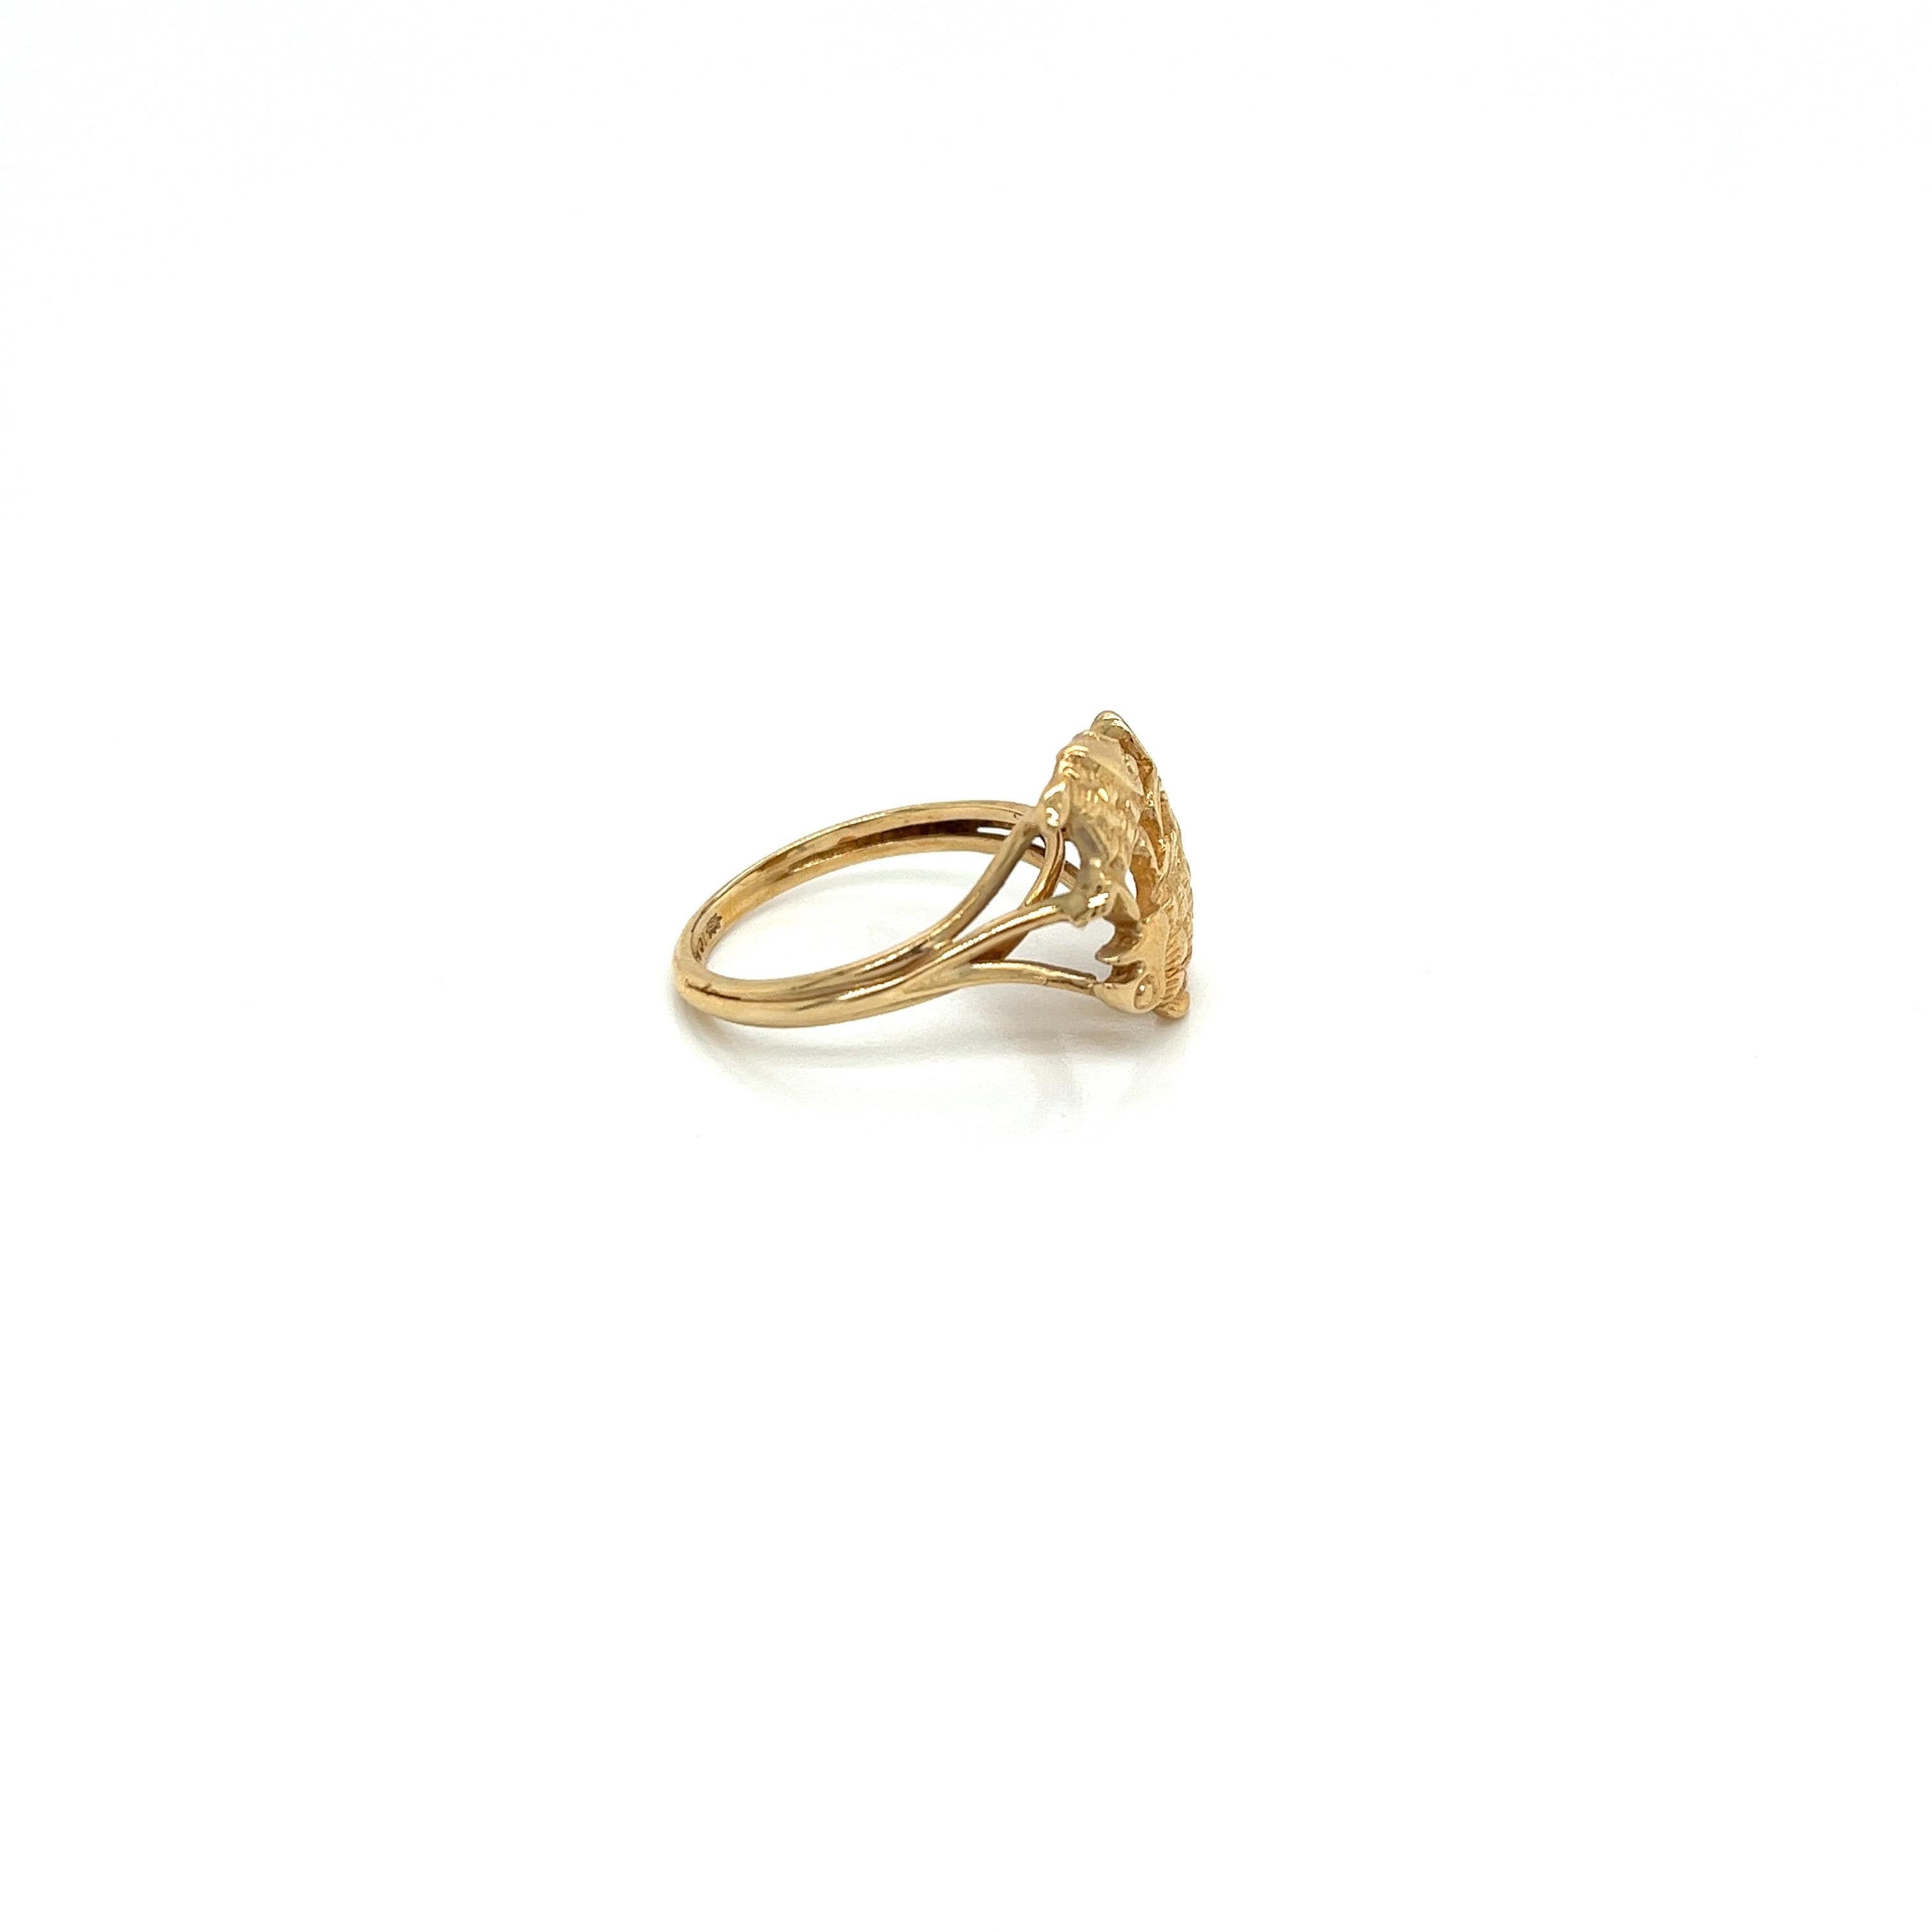 Vintage 1980's 10k Yellow Gold Fish Jumping Over Fish Statement Ring. The top of the ring double fish design measures 14mm tall and 15mm wide and sits 5mm high off the finger. The width of the band on the side measures 4mm and tapers down to 2mm